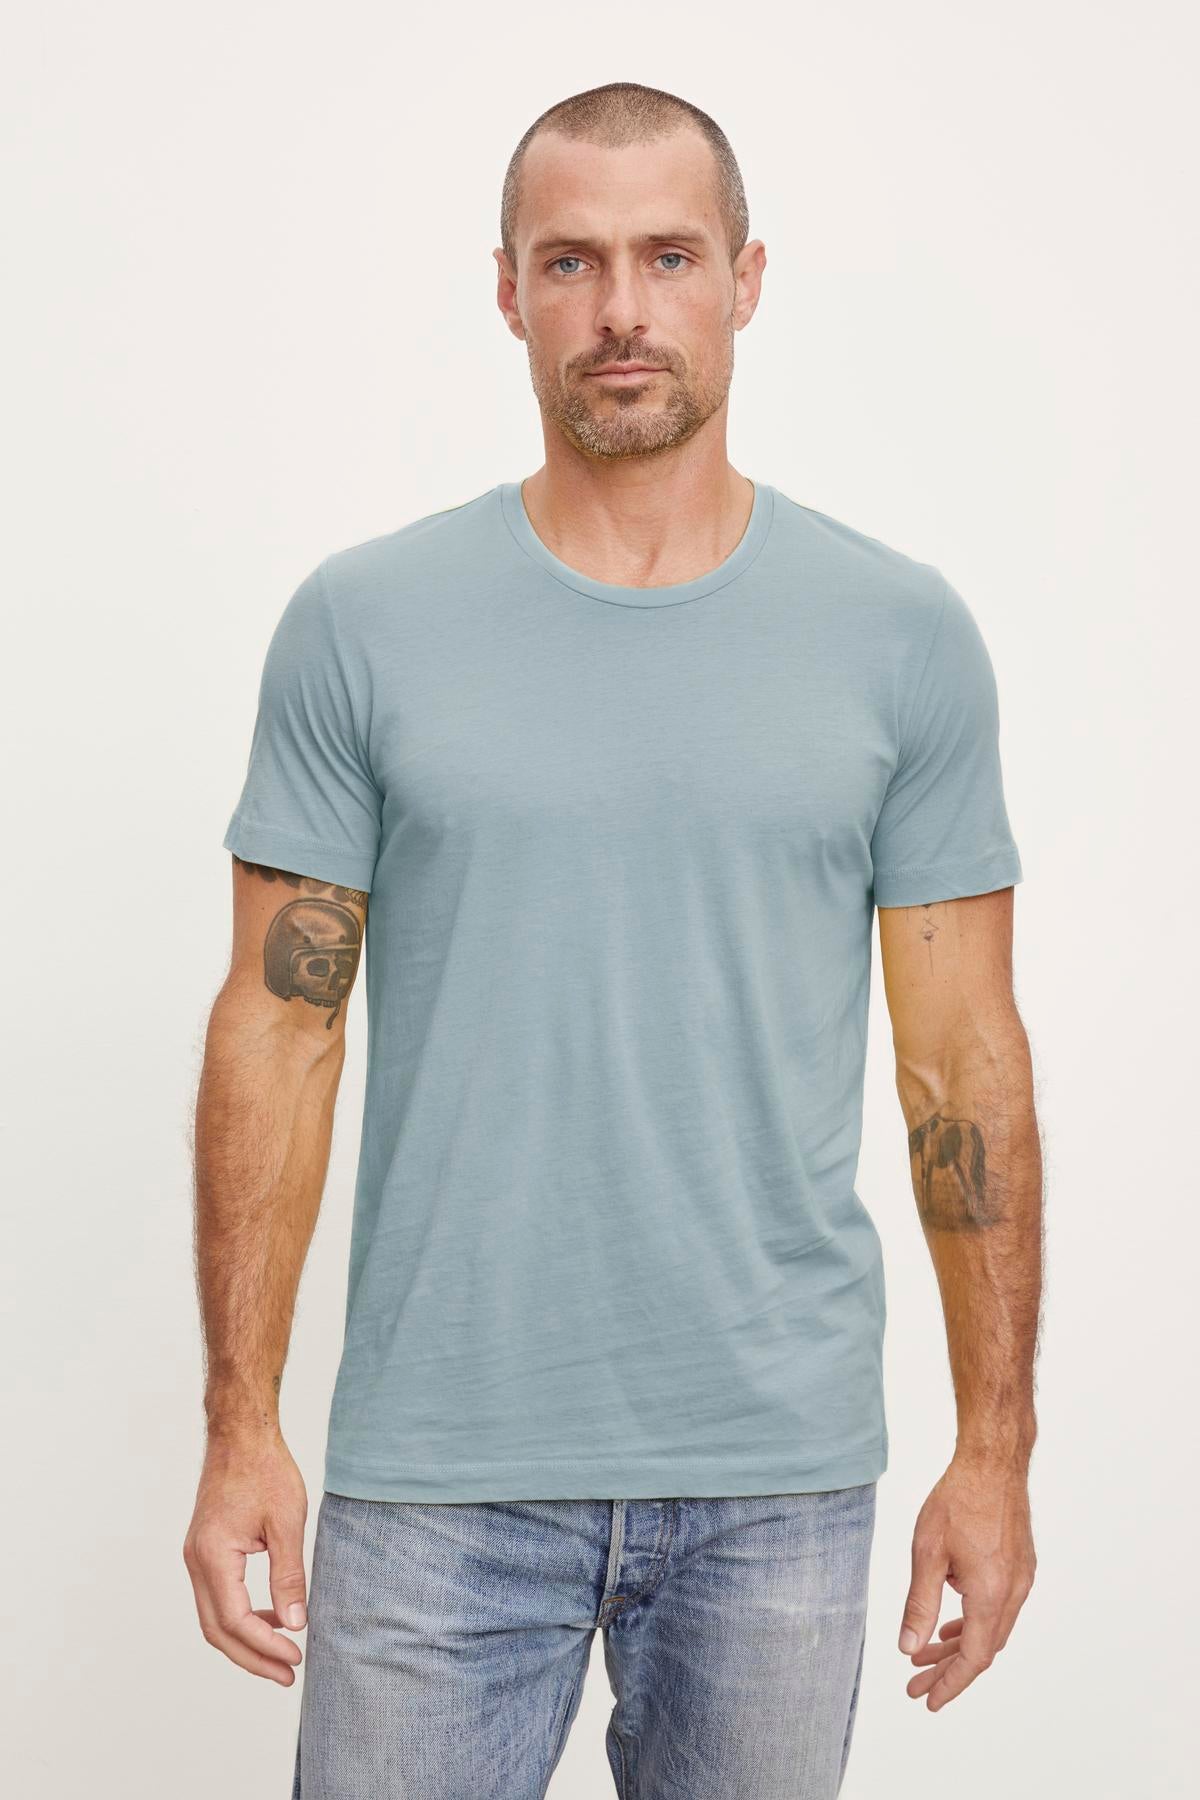 A man wearing a flawless fit HOWARD WHISPER CLASSIC CREW NECK TEE made of lightweight cotton knit by Velvet by Graham & Spencer.-36009113714881